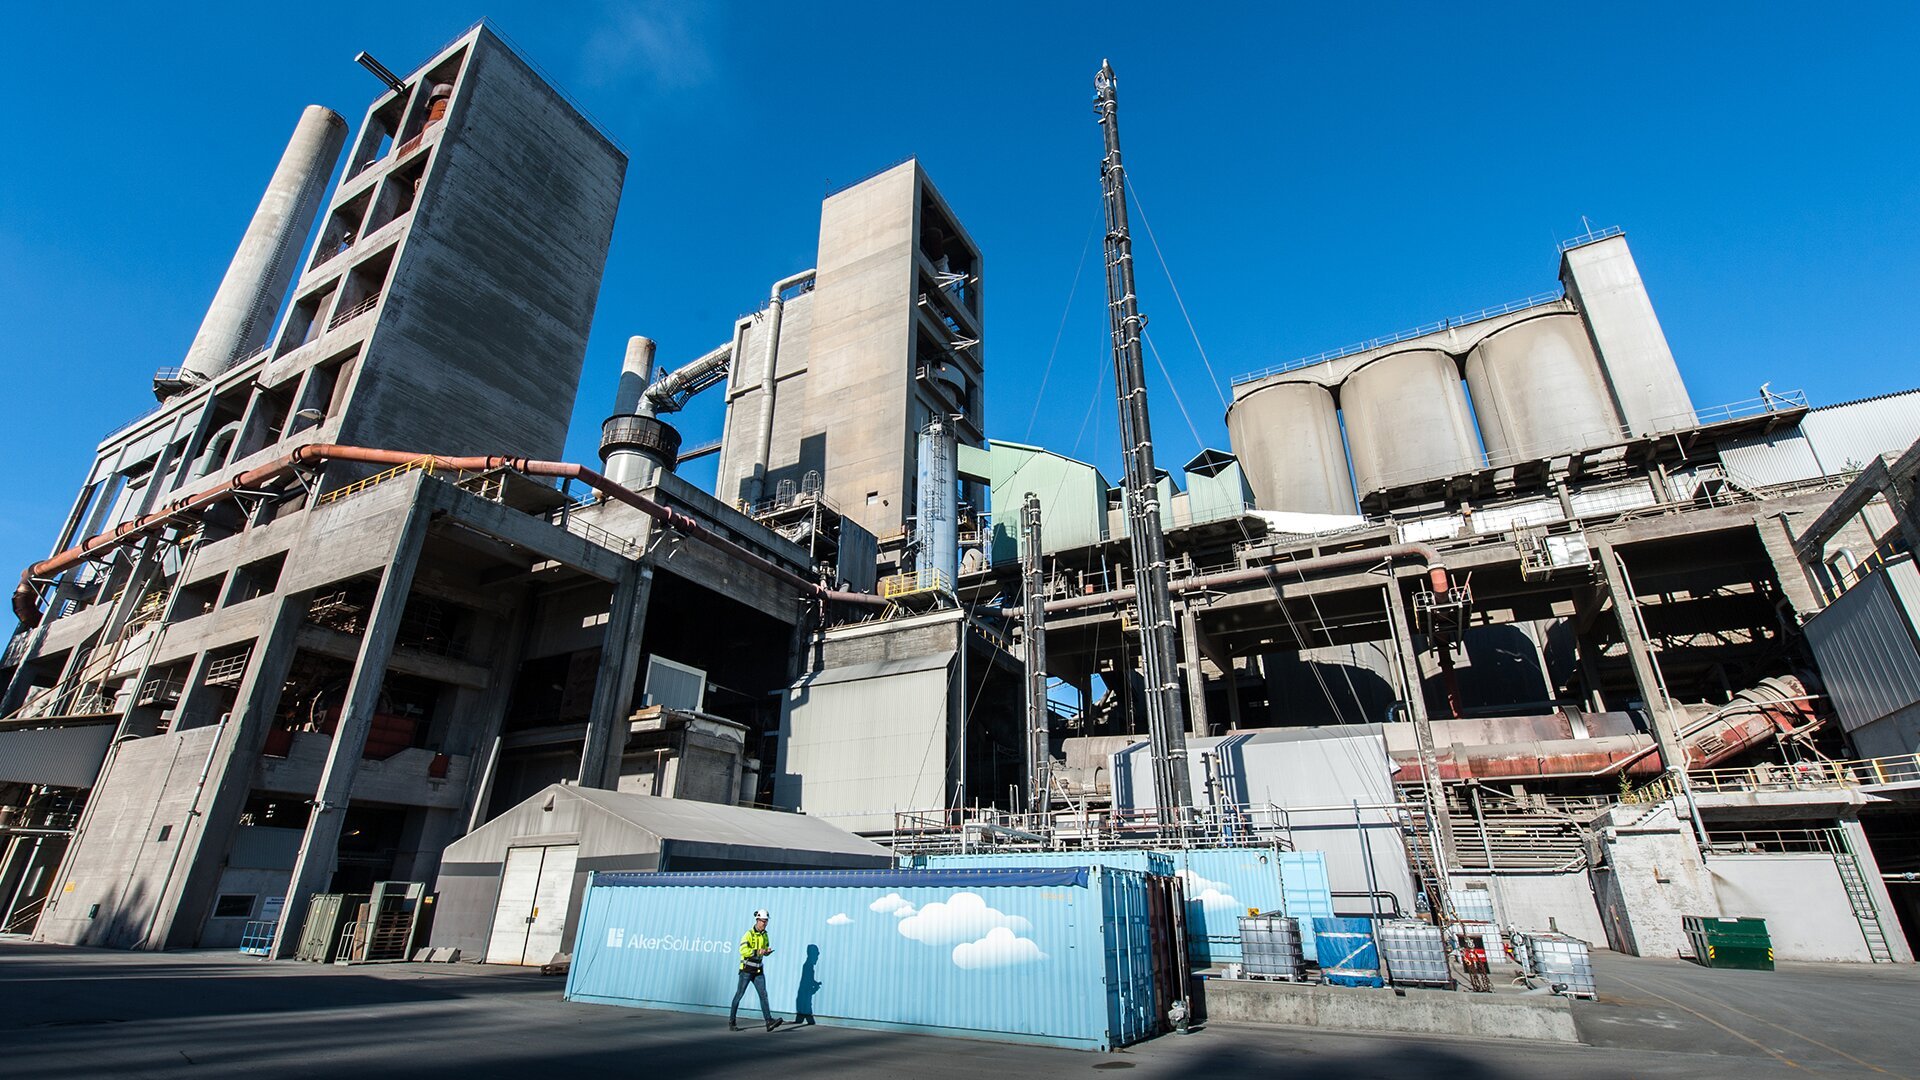 Cement Plant Power Solutions